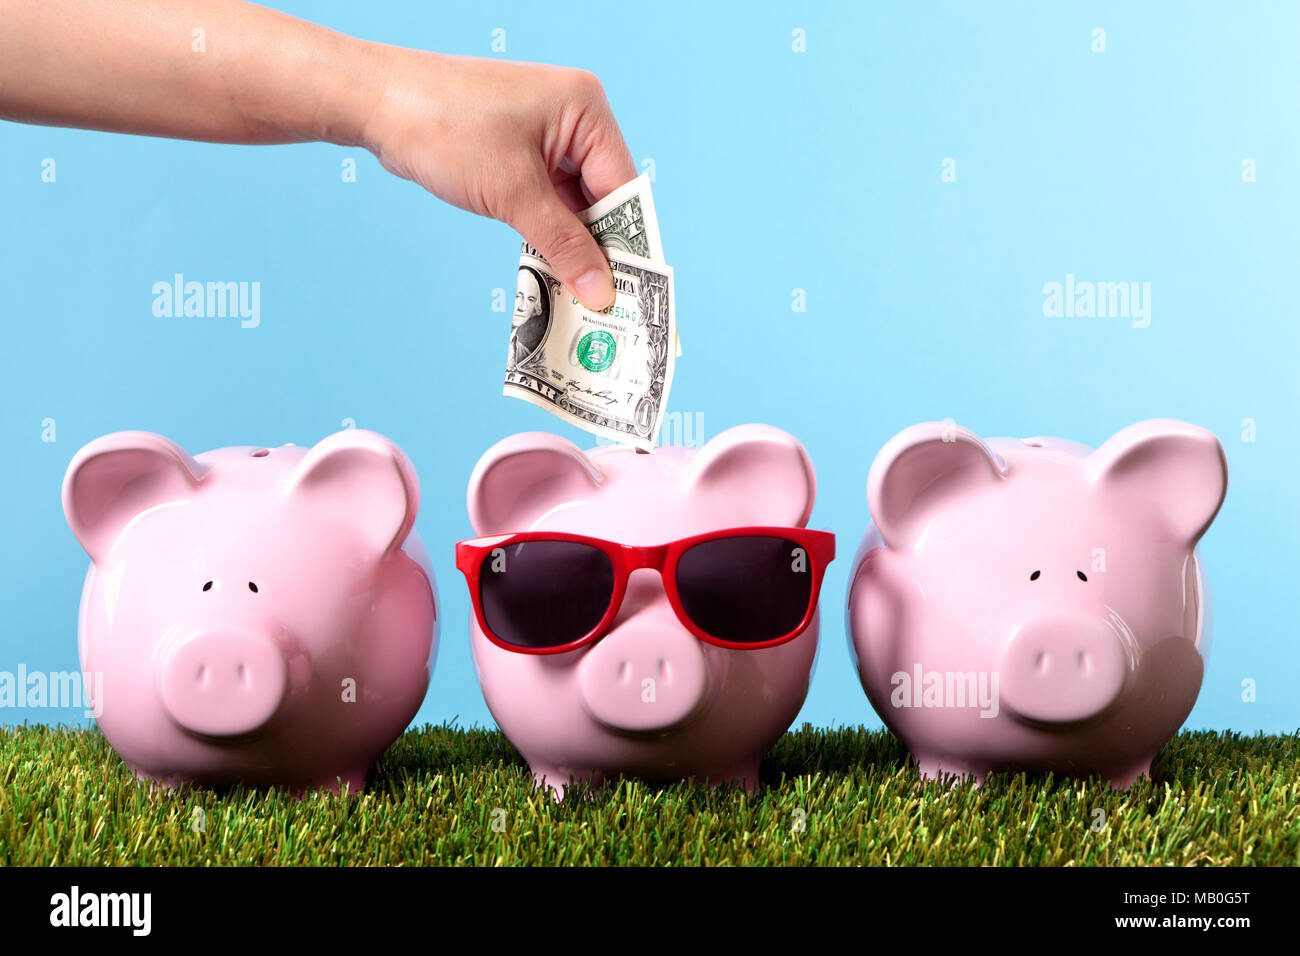 Female hand putting a one dollar bill into a pink piggy bank wearing sunglasses Stock Photo